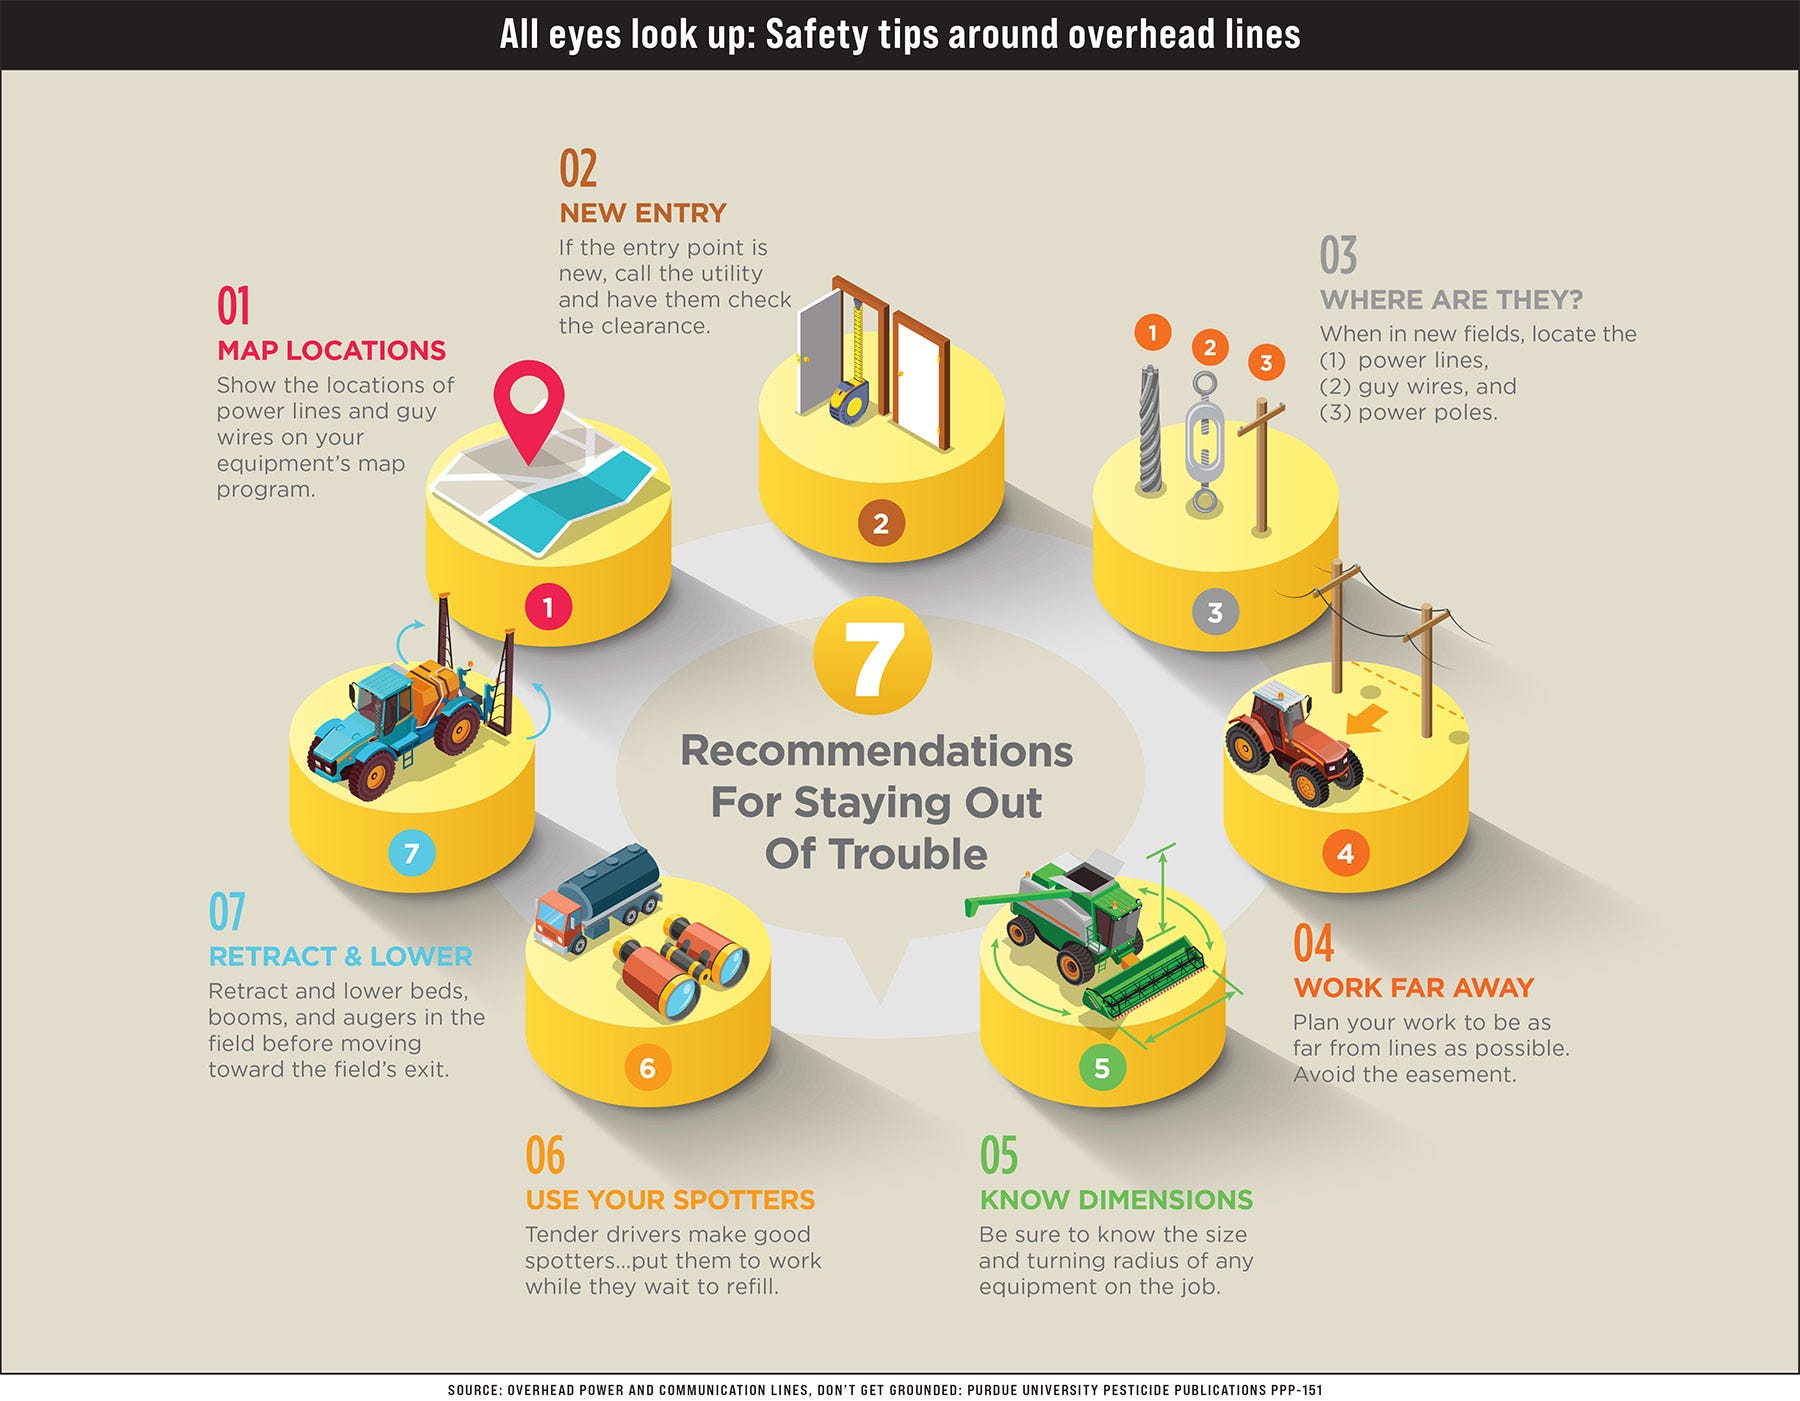 graphic illustrating 7 tips about operating farm equipment safely around overhead lines